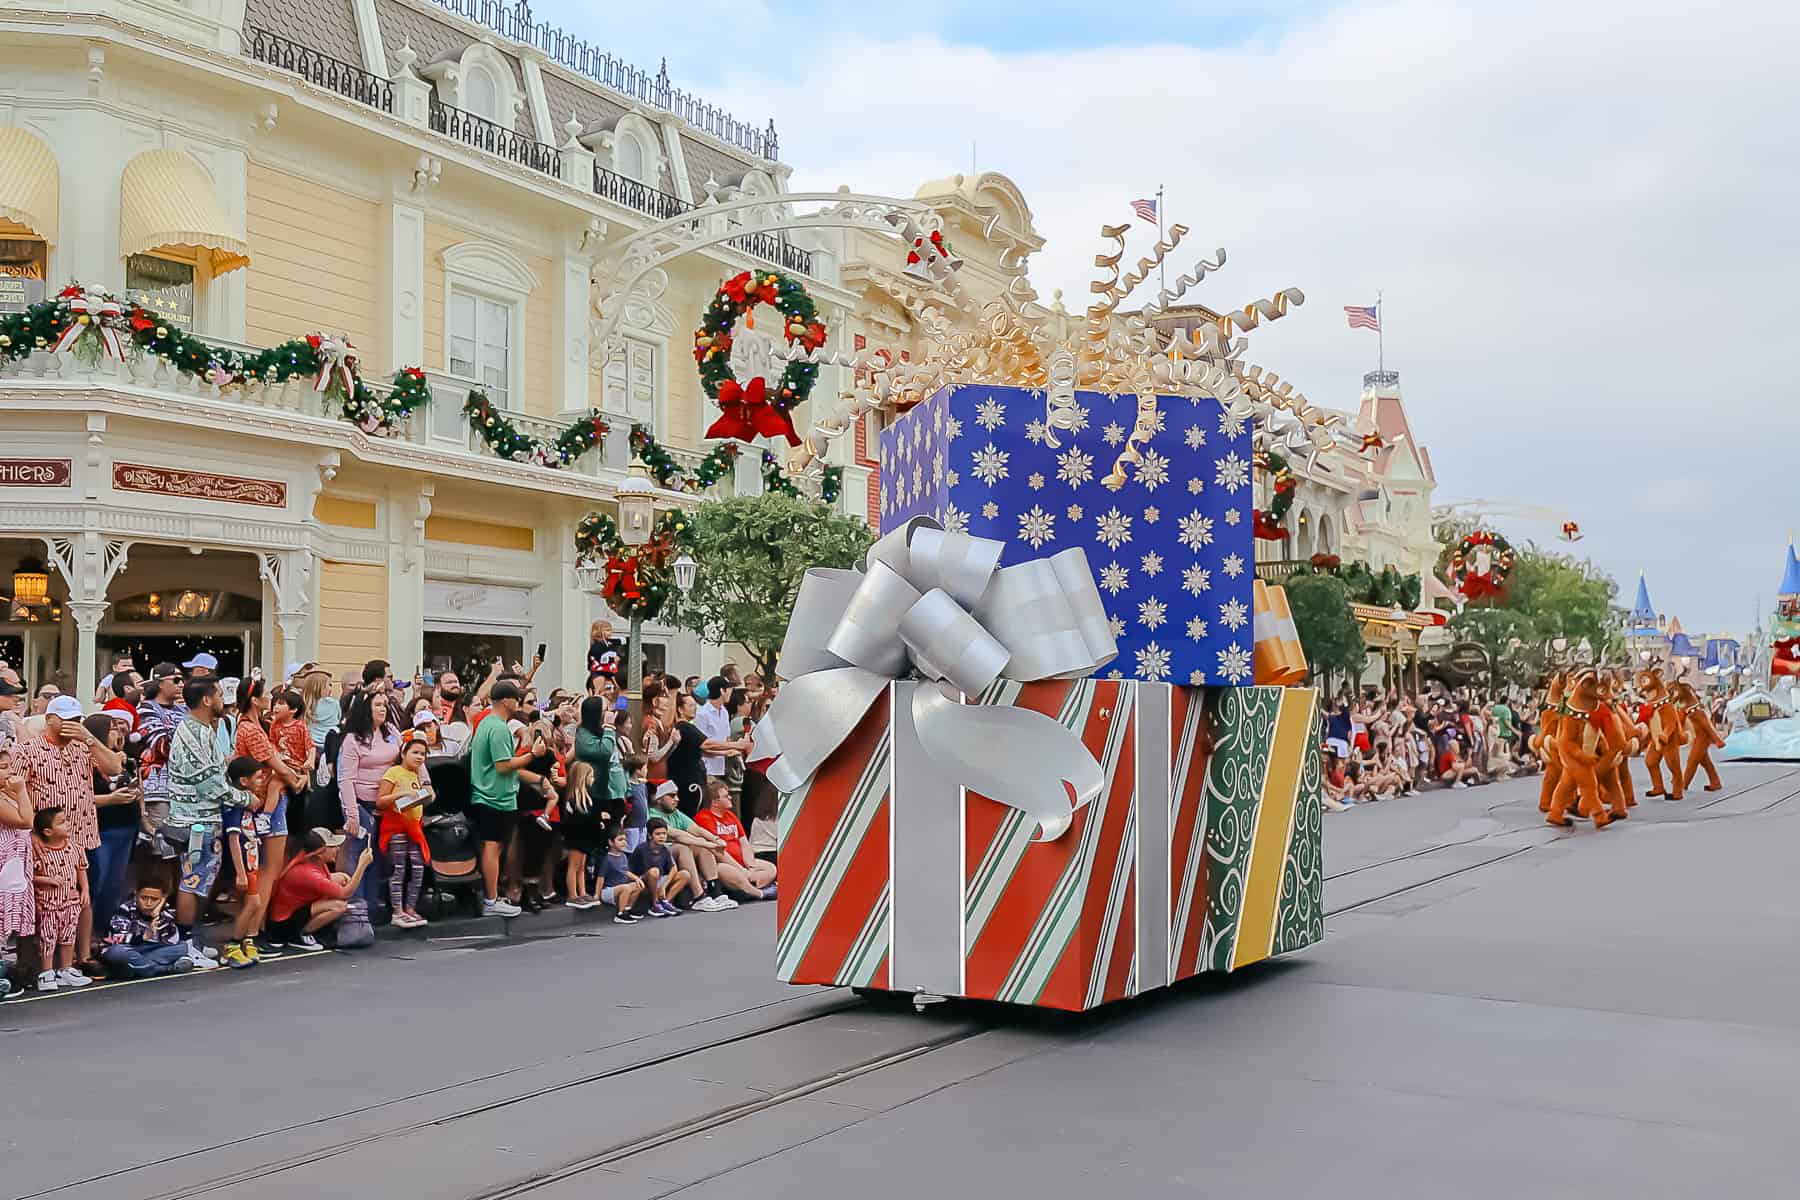 Giant float that's shaped like wrapped Christmas presents. 